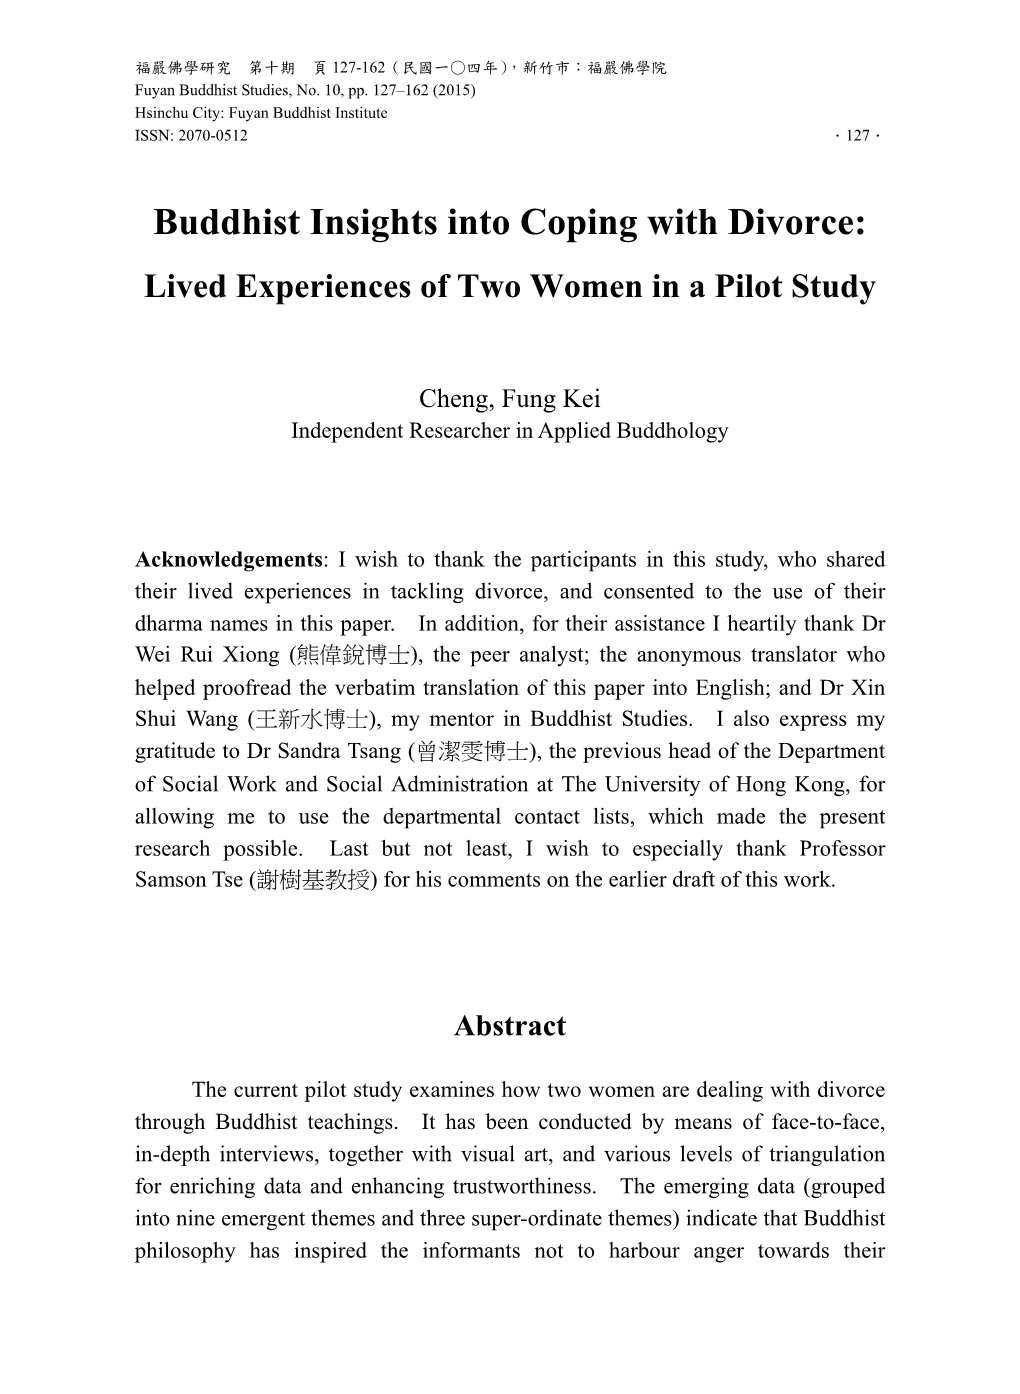 Buddhist Insights Into Coping with Divorce: Lived Experiences of Two Women in a Pilot Study